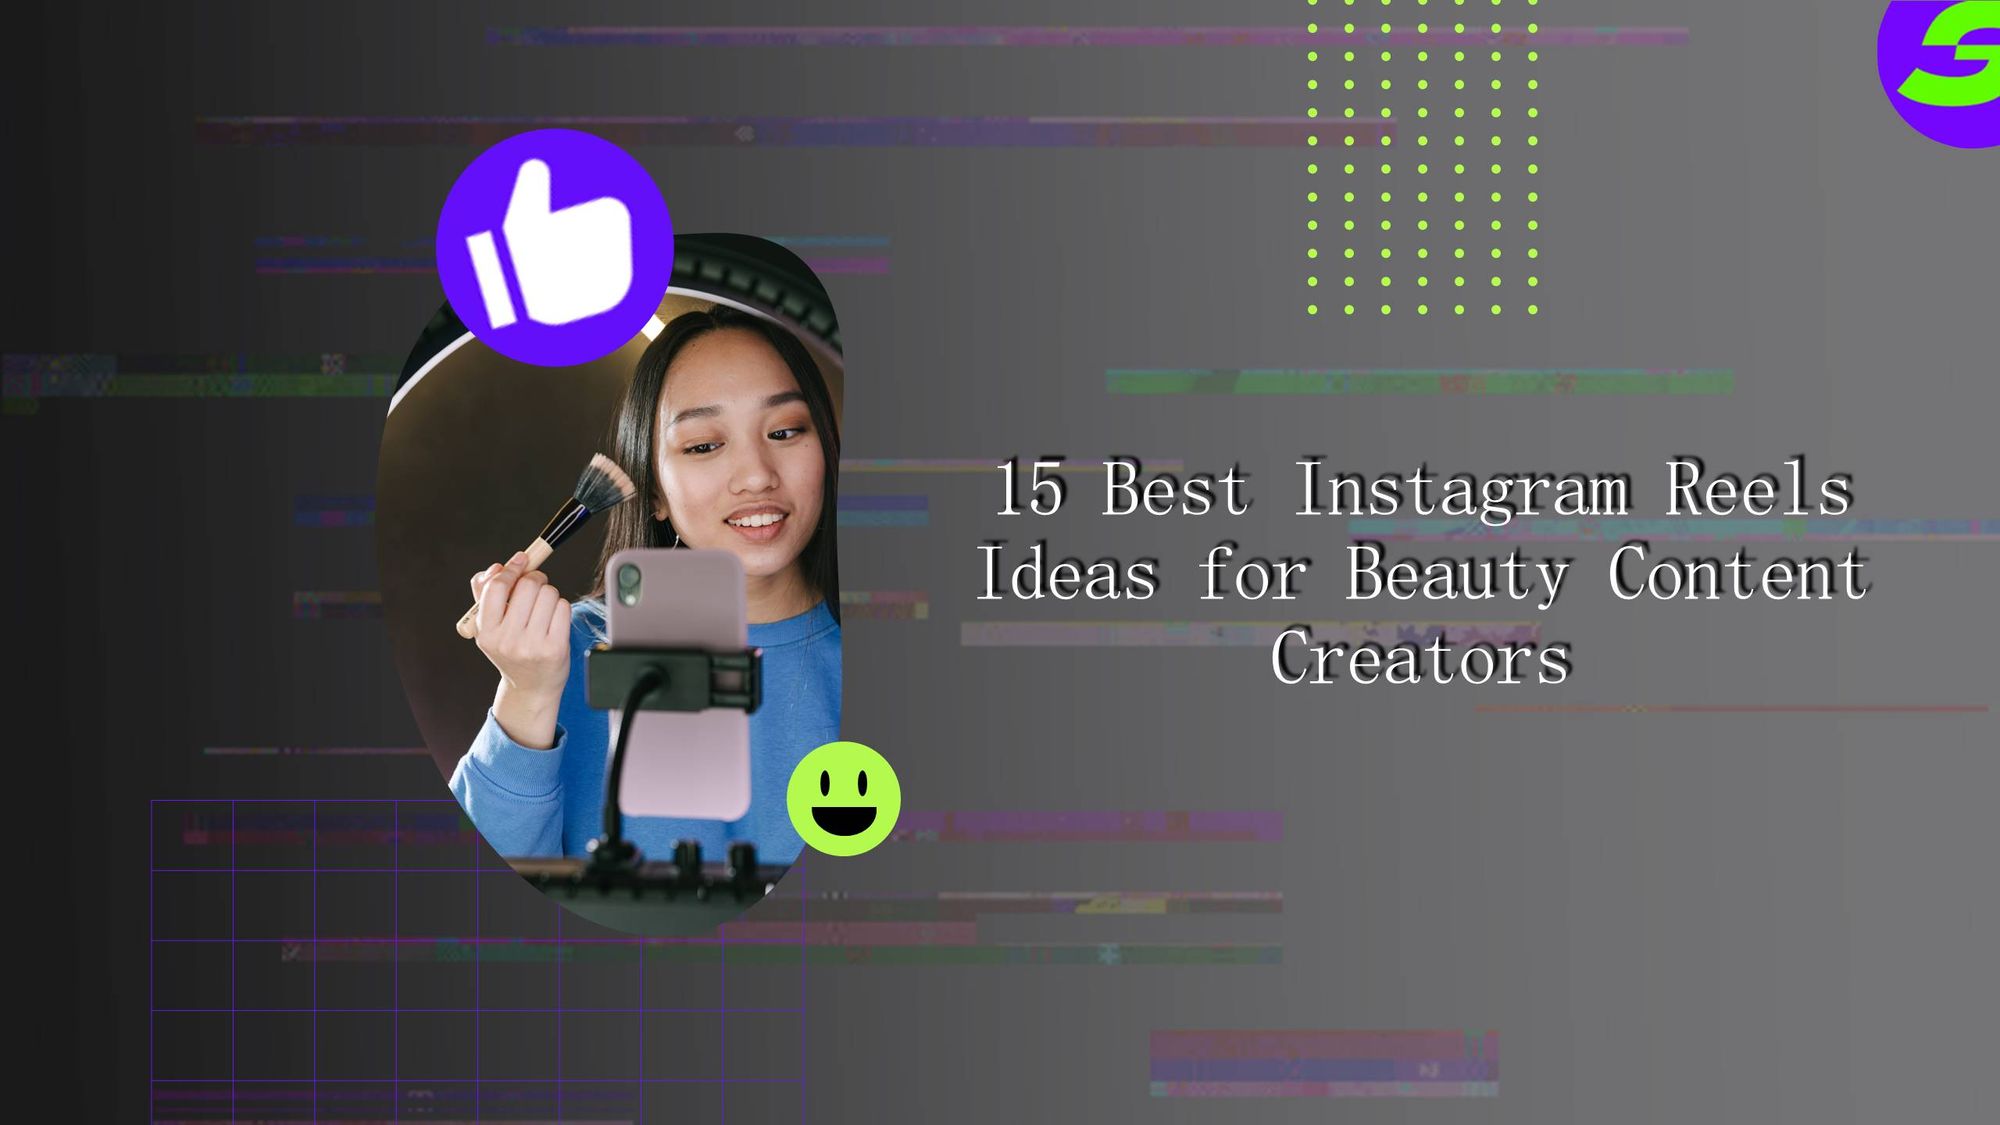 15 Top Instagram Reels for Beauty Content Ideas